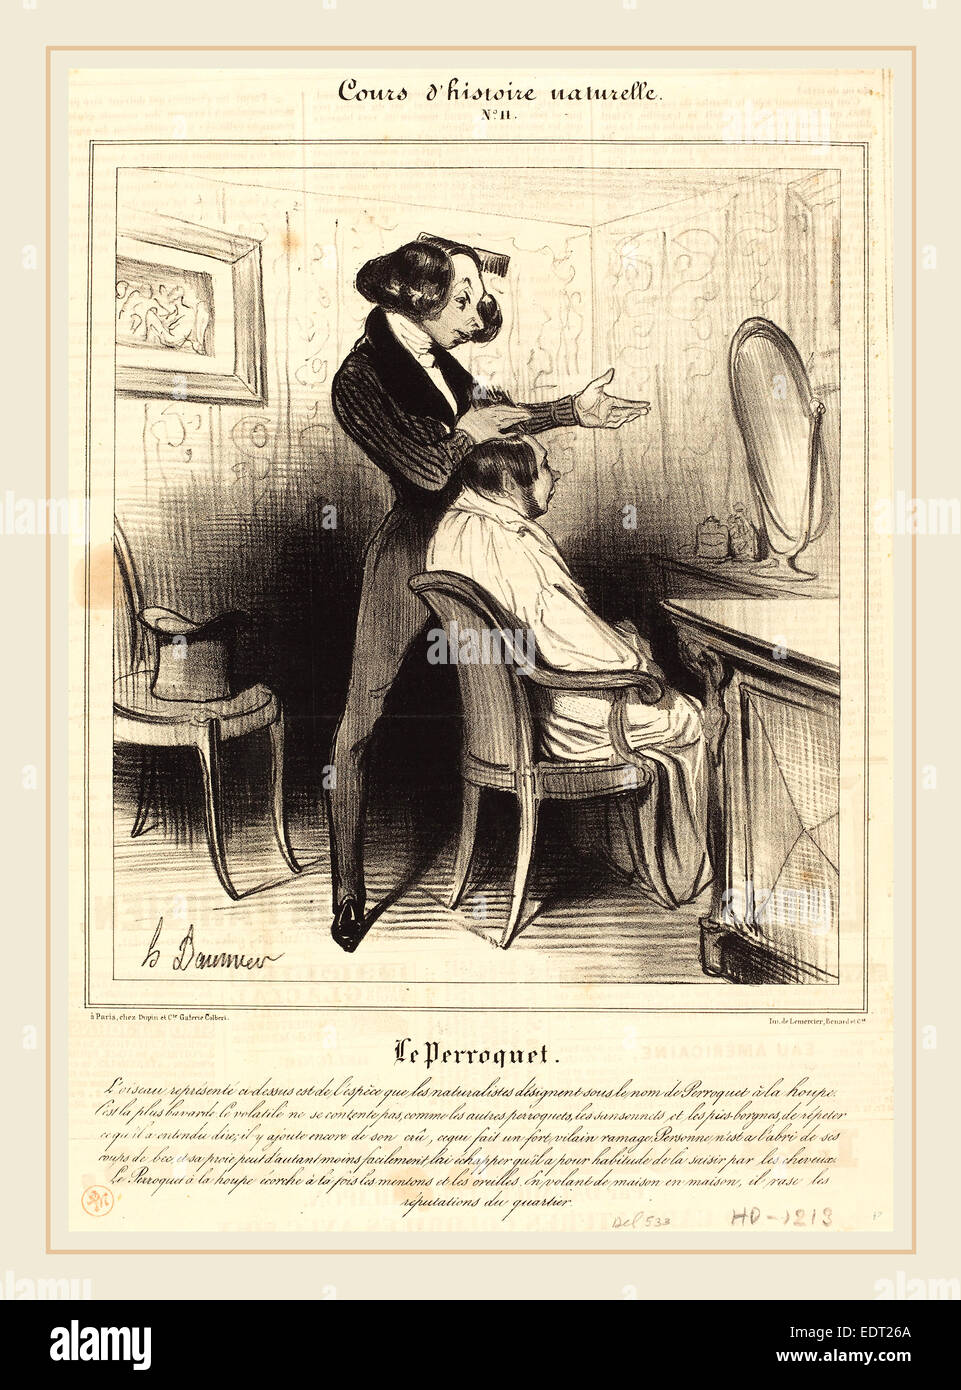 Honoré Daumier (French, 1808-1879), Le Perroquet, 1838, lithograph on newsprint Stock Photo